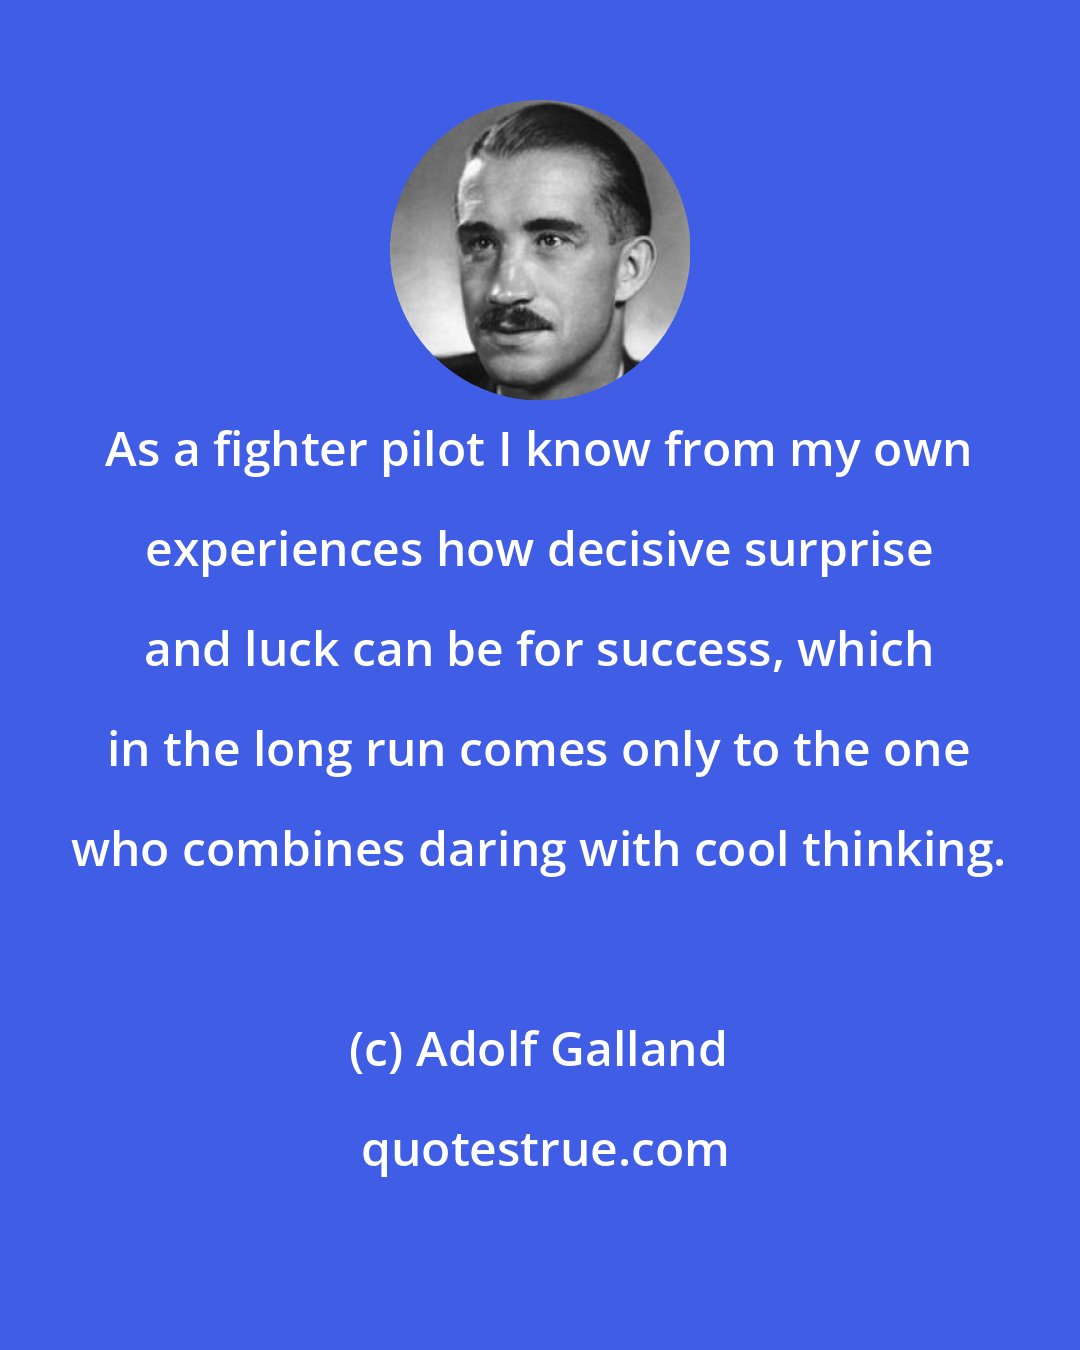 Adolf Galland: As a fighter pilot I know from my own experiences how decisive surprise and luck can be for success, which in the long run comes only to the one who combines daring with cool thinking.